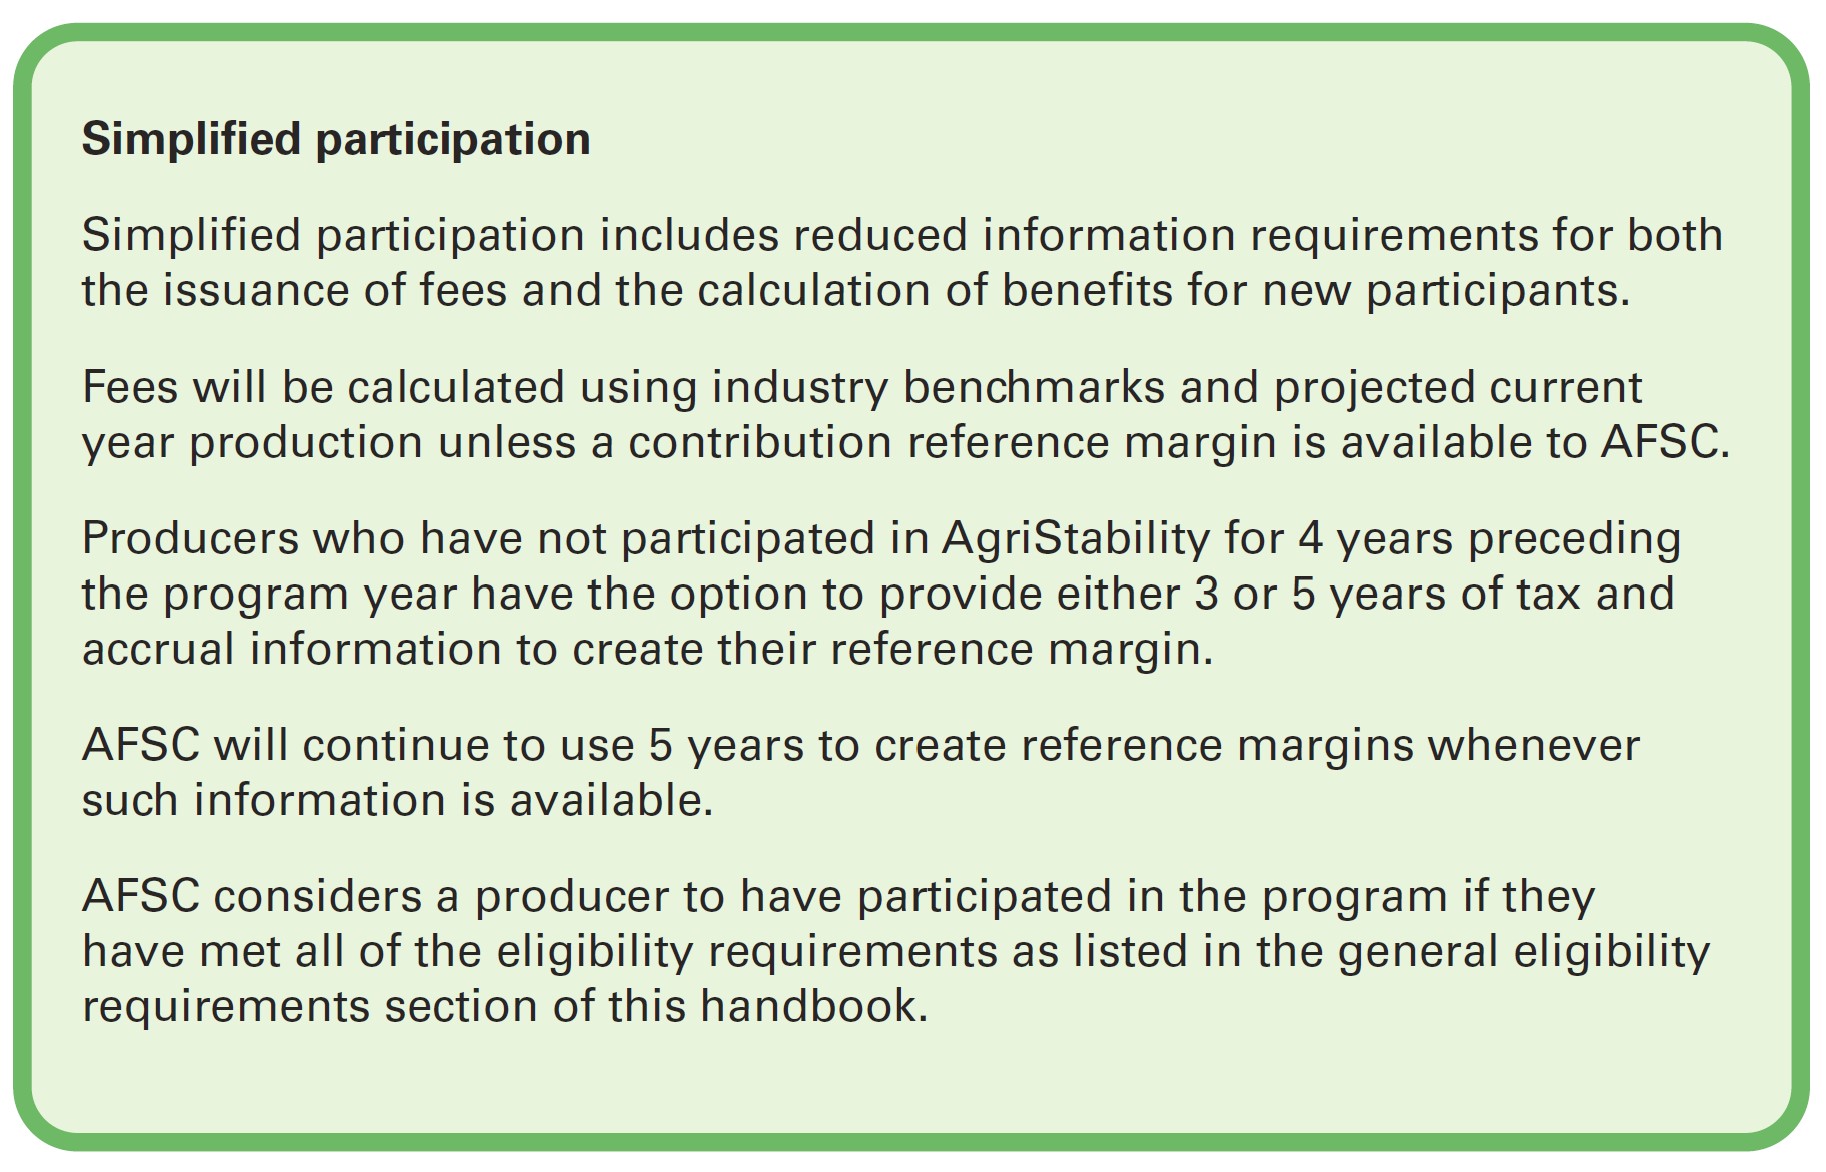 Simplified participation includes reduced information requirements for both the issuance of fees and the calculation of benefits for new participants. Fees will be calculated using industry benchmarks and projected current year production unless a contribution reference margin is available to AFSC. Producers who have not participated in AgriStability for 4 years preceding the program year have the option to provide either 3 or 5 years of tax and accrual information to create their reference margin. AFSC will continue to use 5 years to create reference margins whenever such information is available. AFSC considers a producer to have participated in the program if they have met all of the eligibility requirements as listed in the general eligibility requirements section of this handbook.